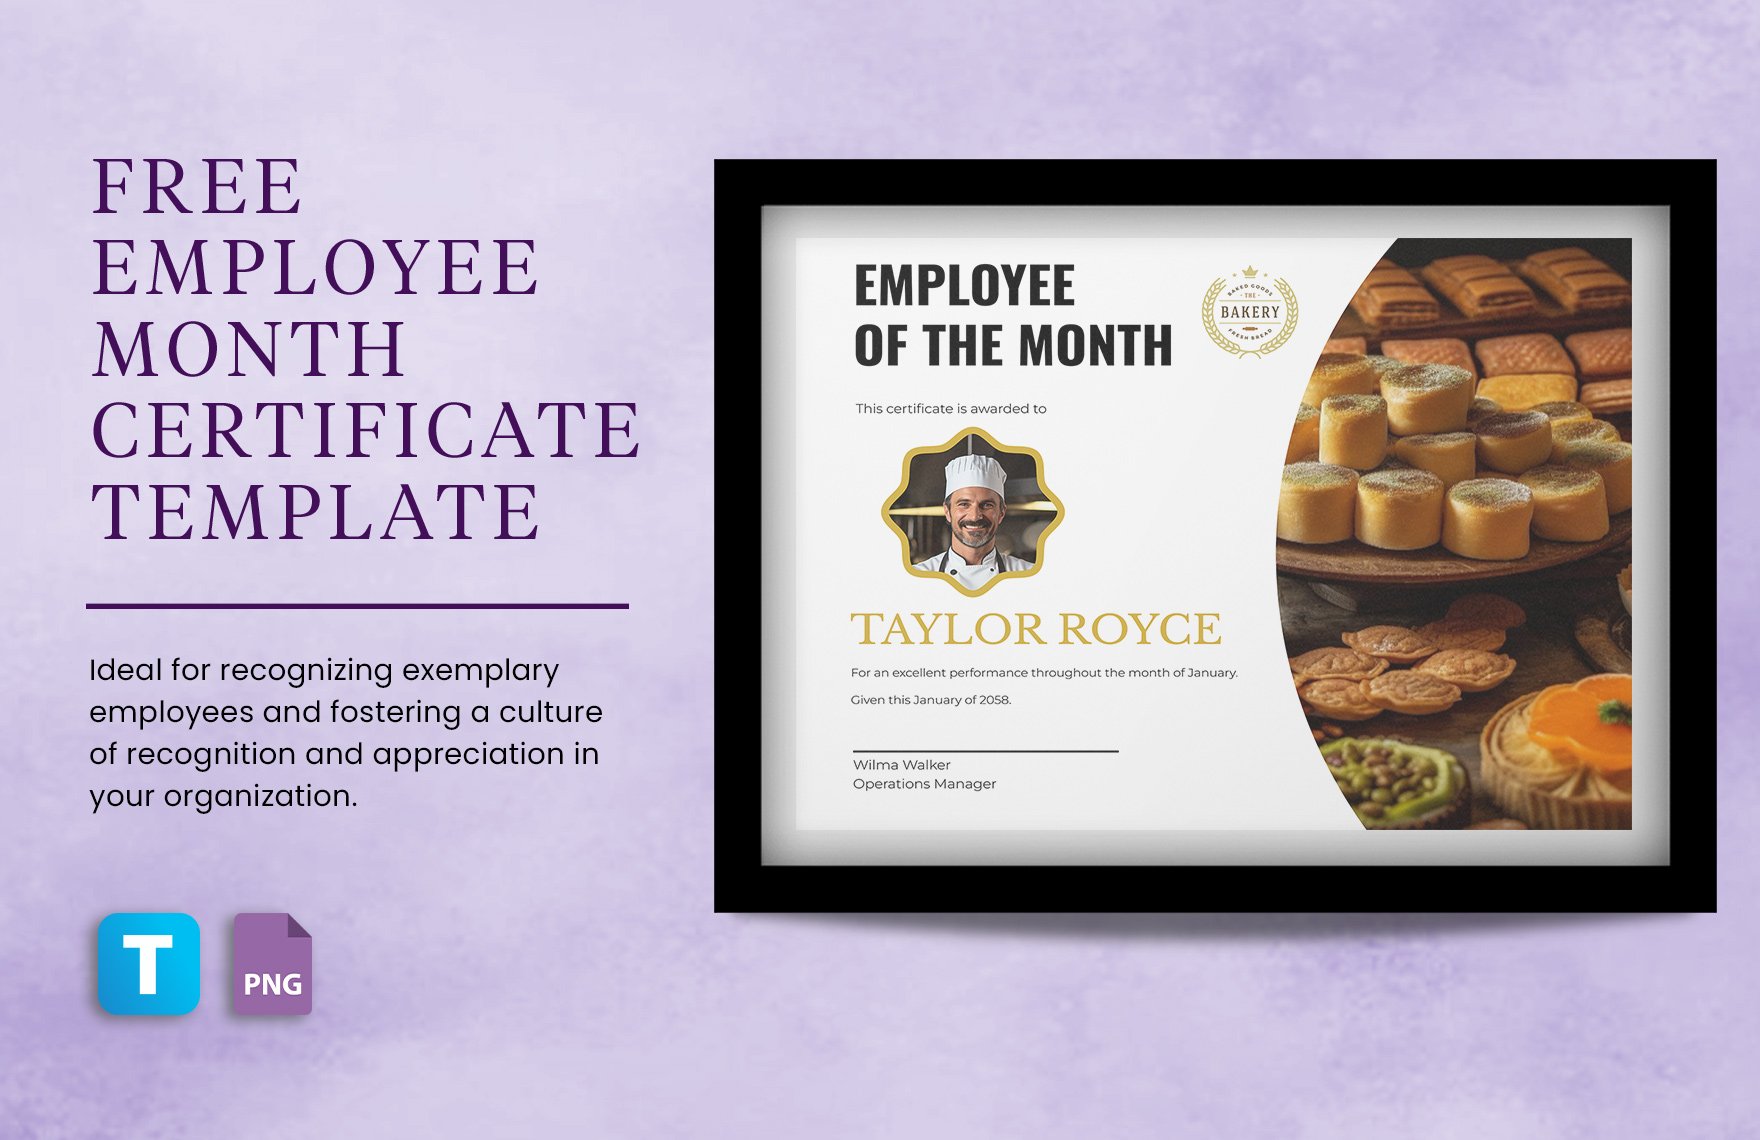 Employee Month Certificate Template in PNG